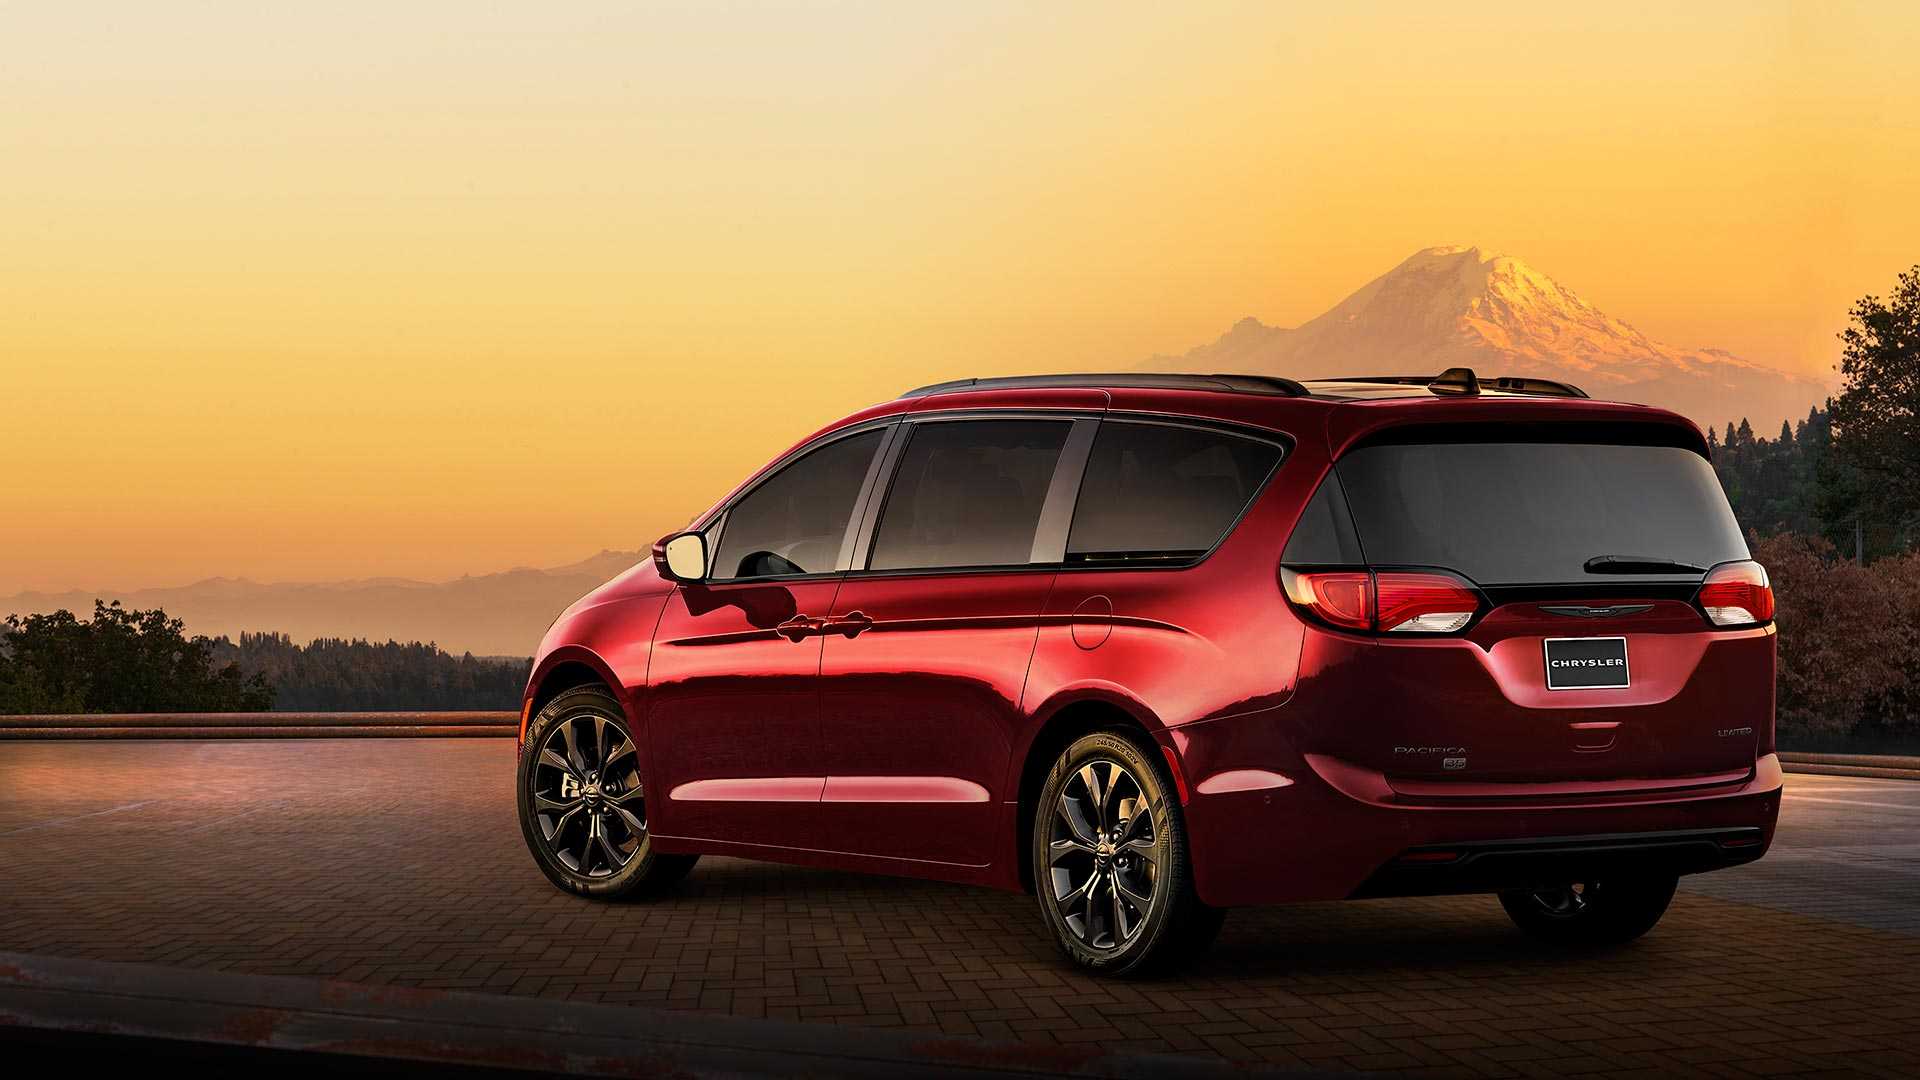 Chrysler Pacifica AWD Expected In Q2 2020 With PlugIn Hybrid